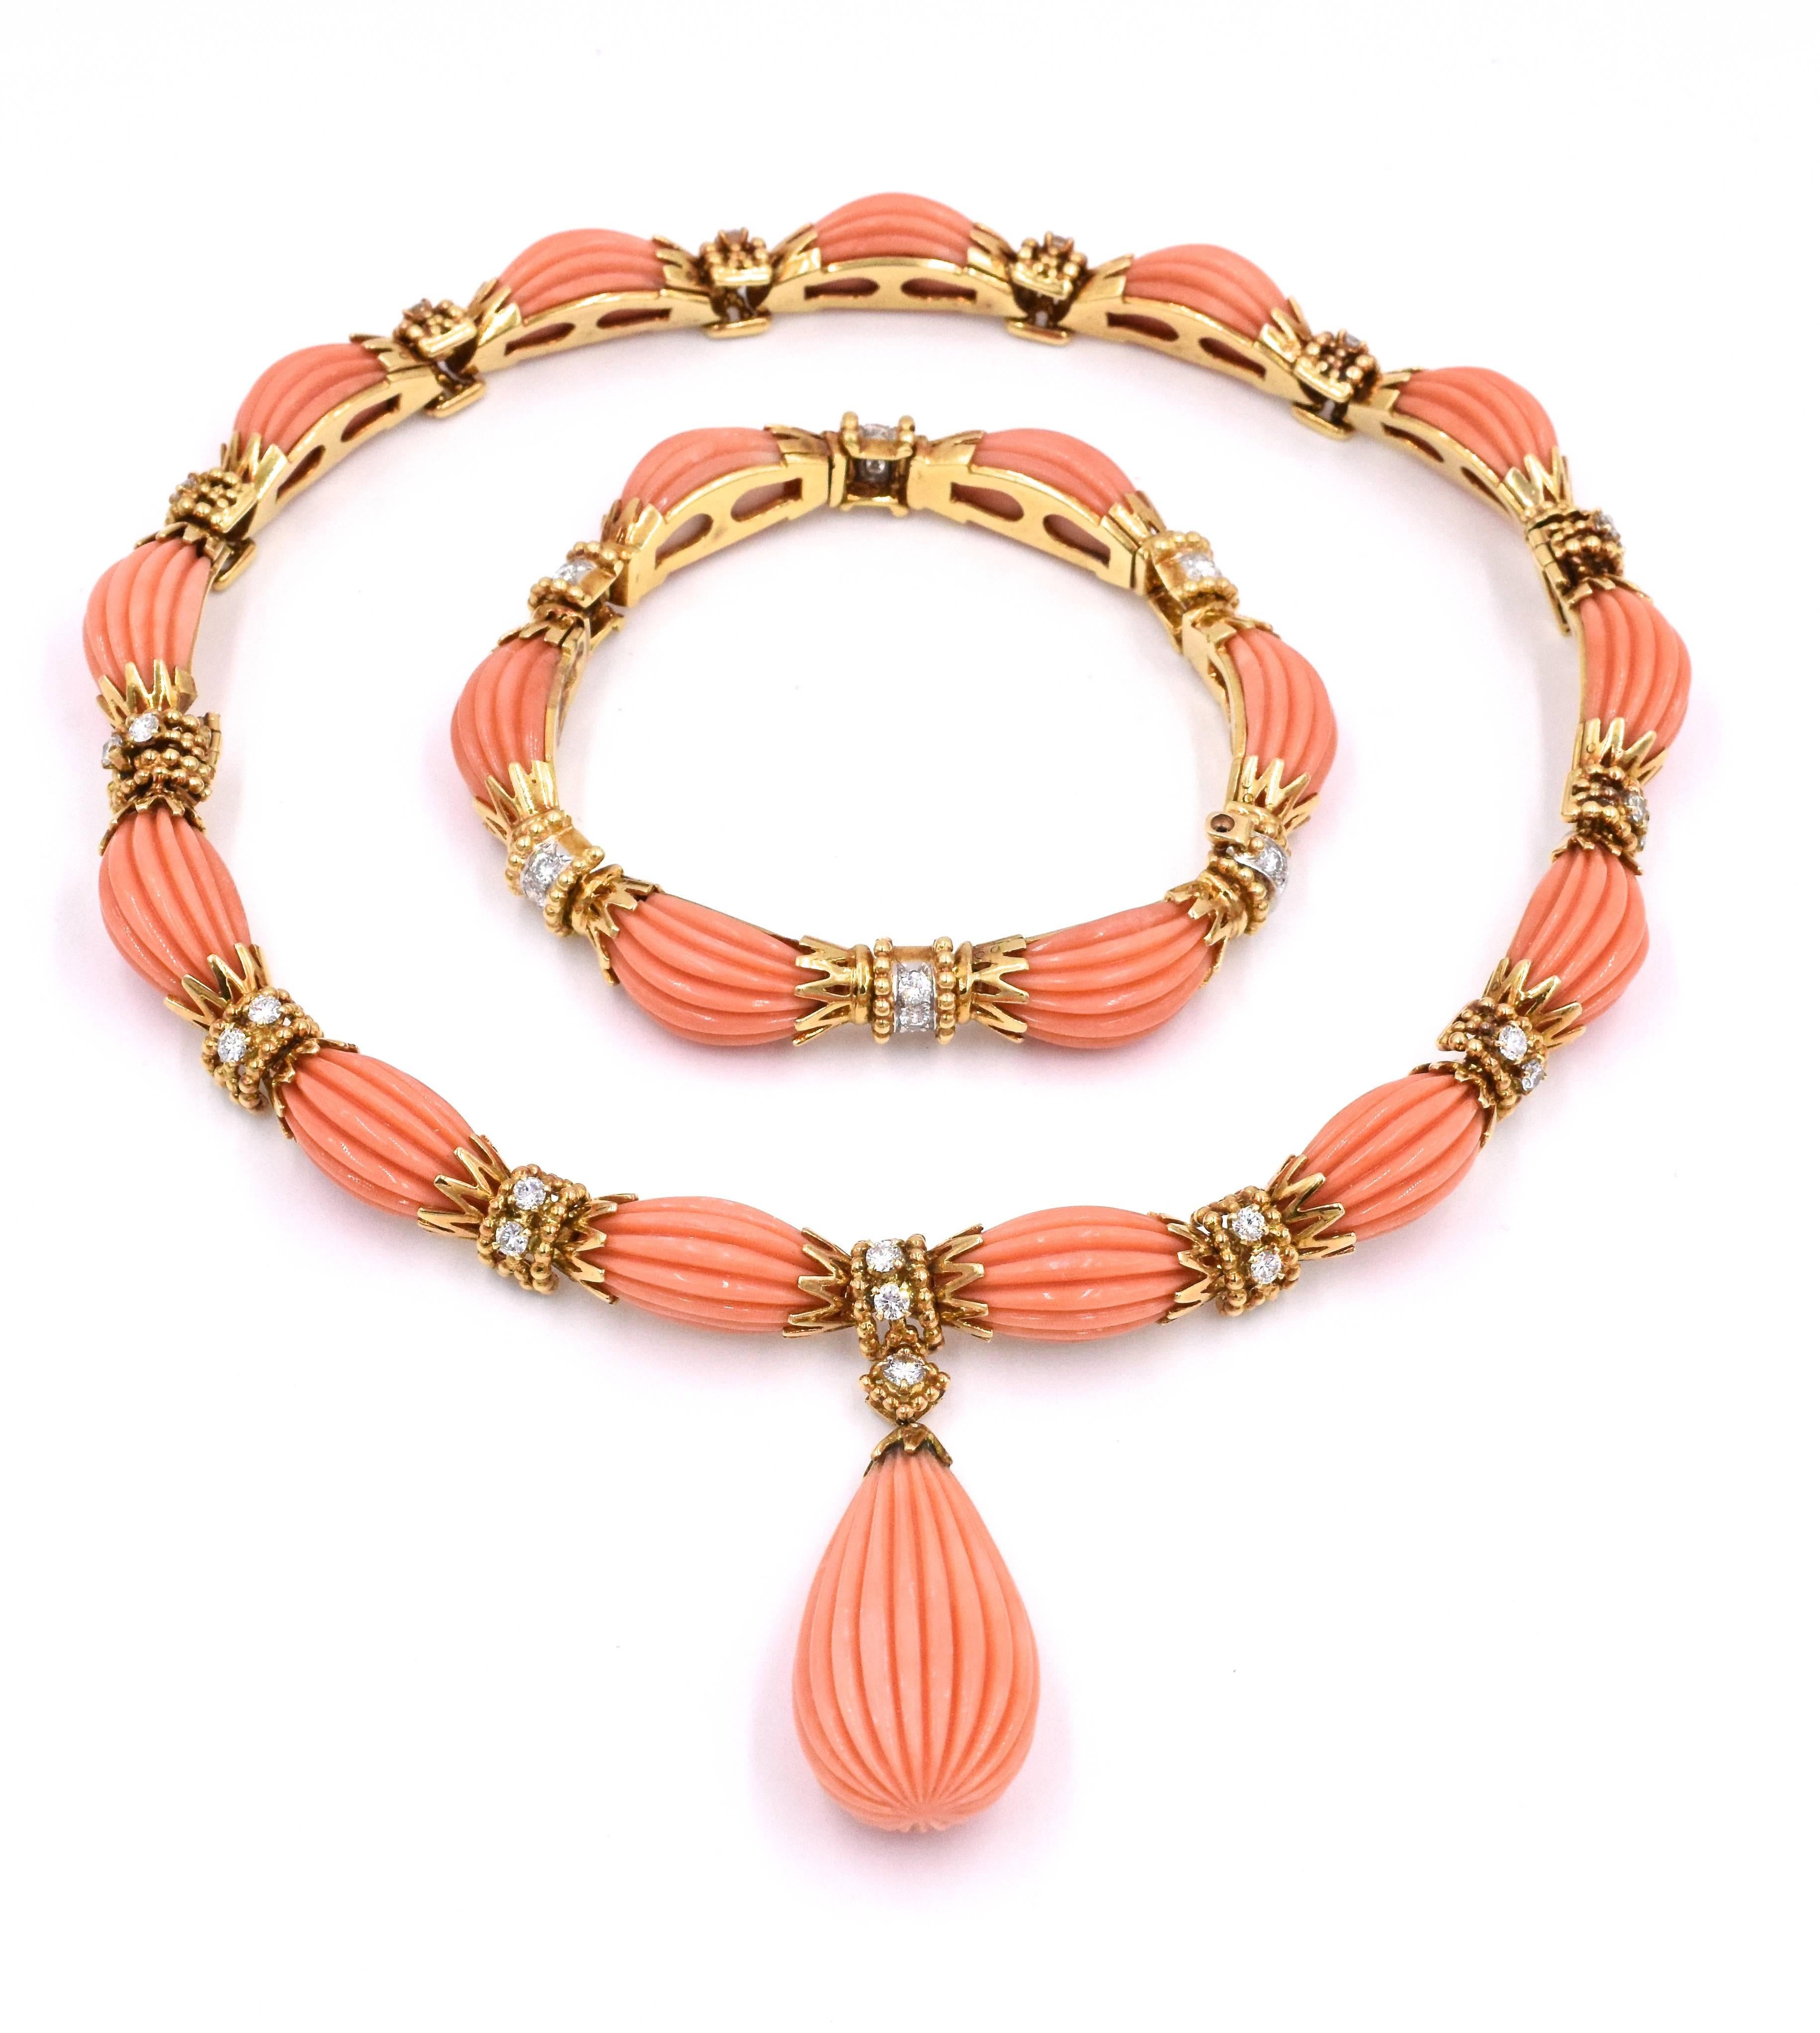 Magnificent color of coral set by Van Cleef & Arpels.
Comprising of a necklace designed as a continuous row of fluted oval cabochon coral, with diamond-set abstract connecting links, which include a total of 26 round diamonds. Suspending a fluted